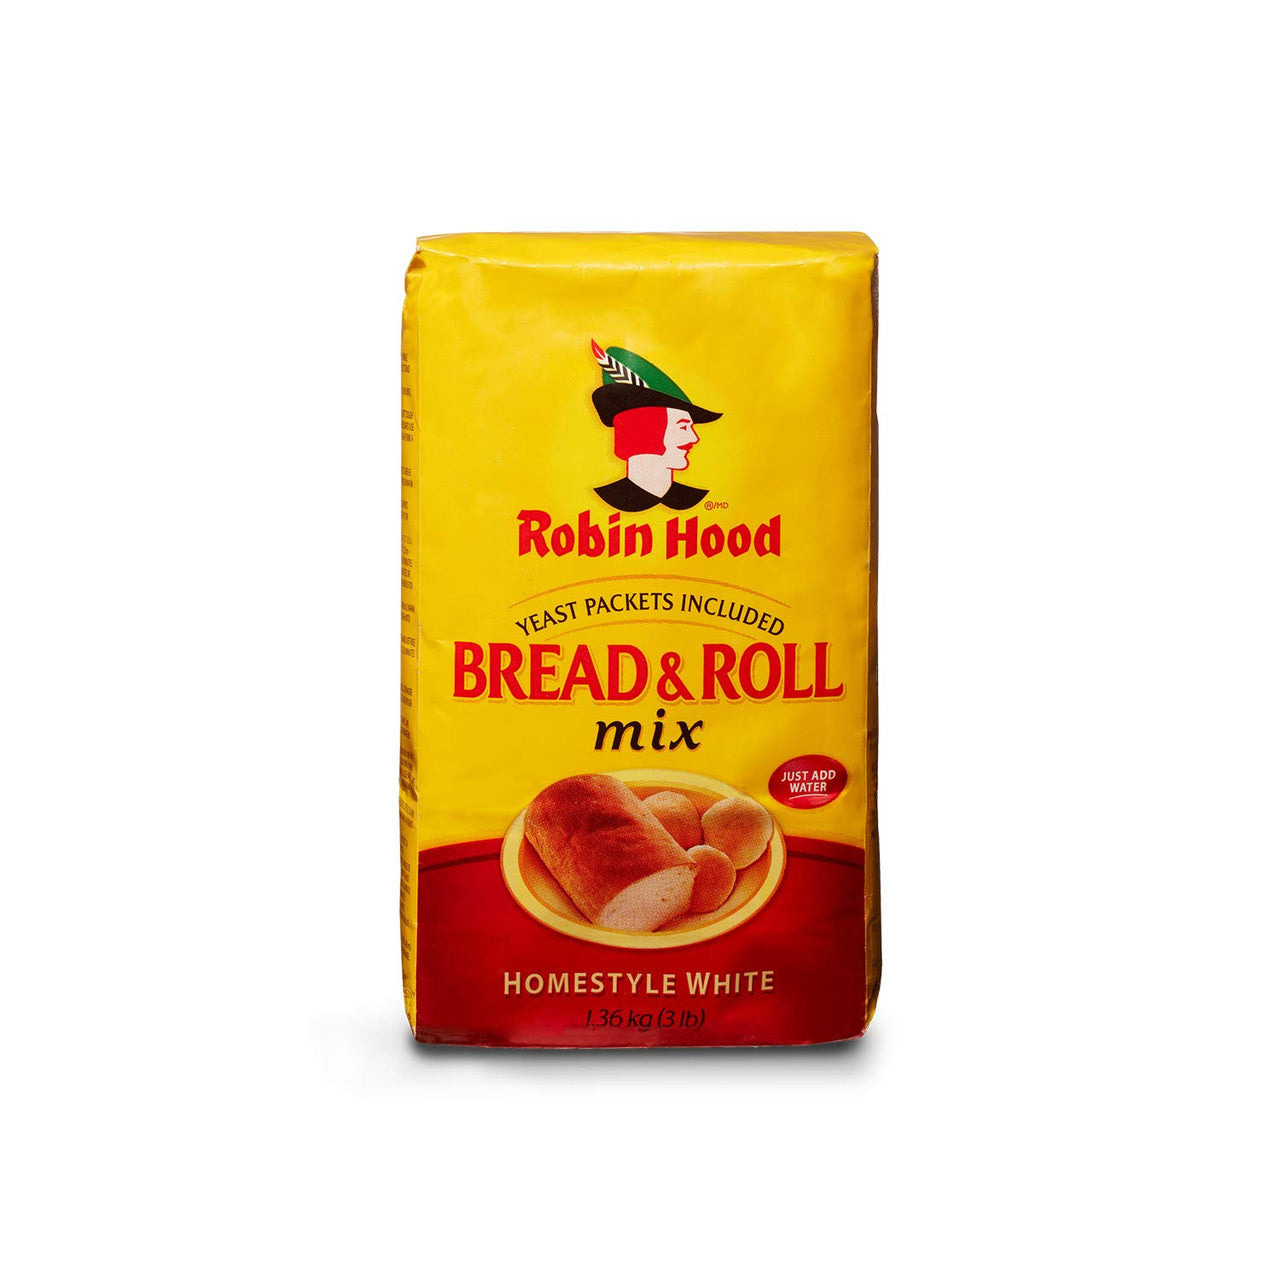 Robin Hood Homestyle White Bread & Roll Mix, 1.36kg/3lbs, (Imported from Canada)